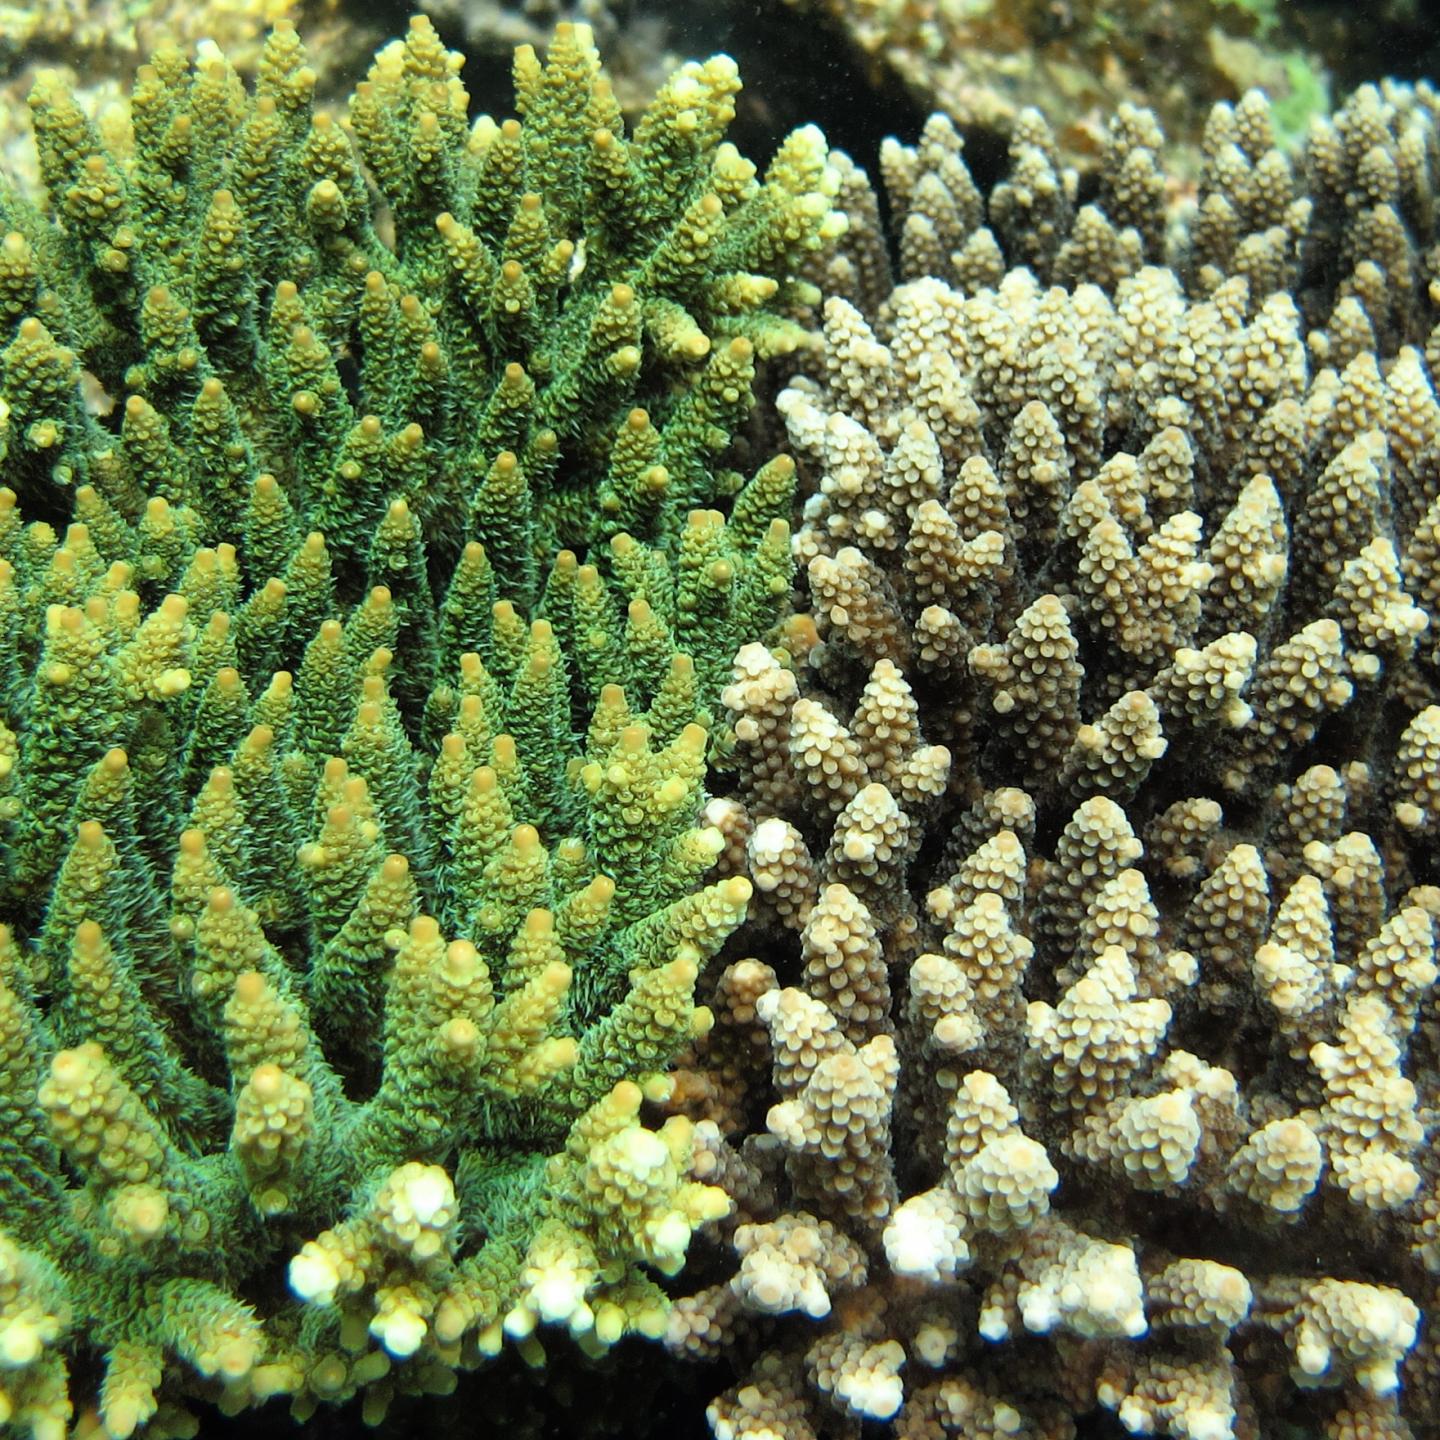 Regular Coral Larvae Supply from Neighboring Reefs Helps Degraded Reefs Recover